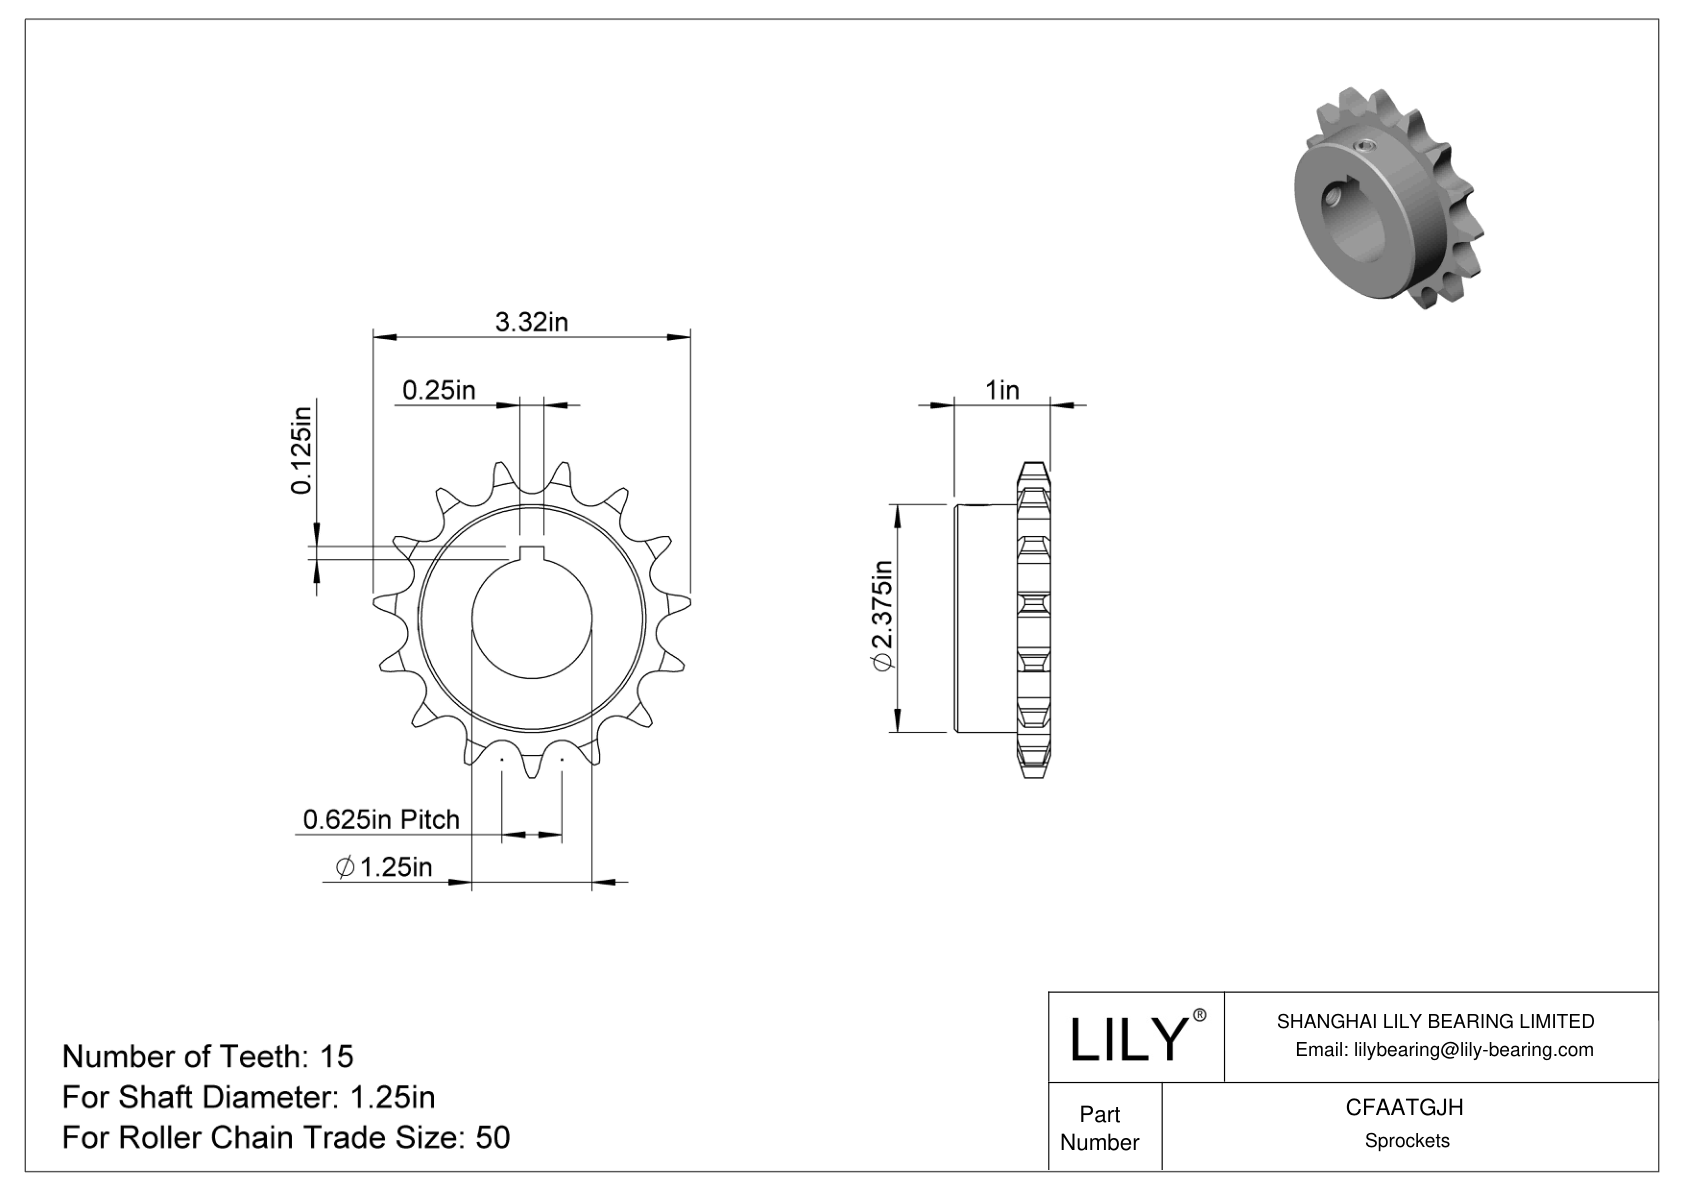 CFAATGJH Wear-Resistant Sprockets for ANSI Roller Chain cad drawing